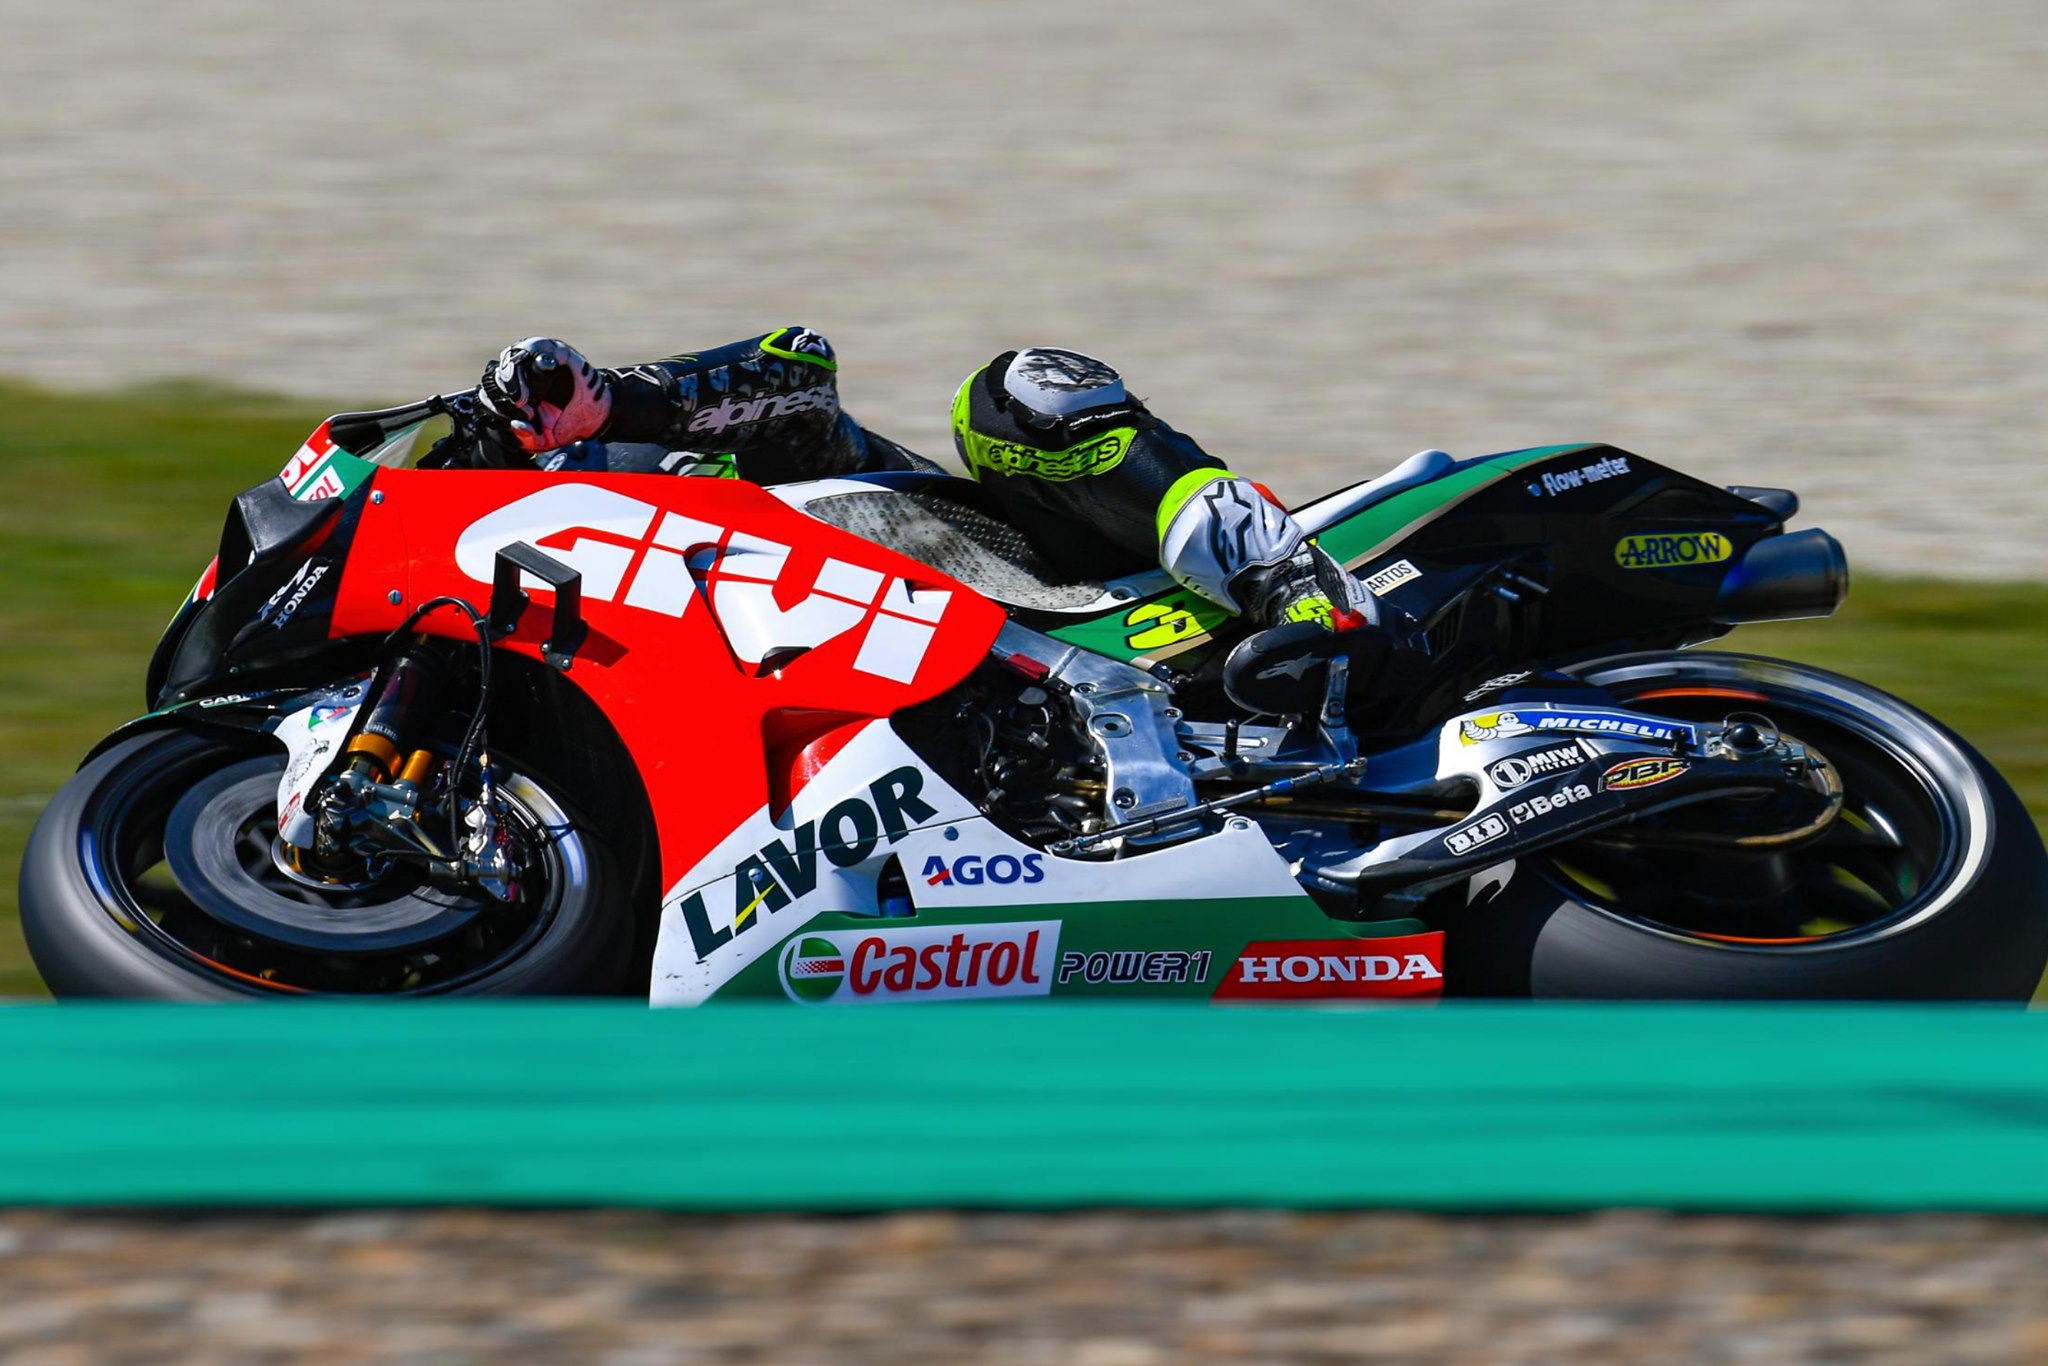 CRUTCHLOW CLAIMS SEVENTH AT ASSEN